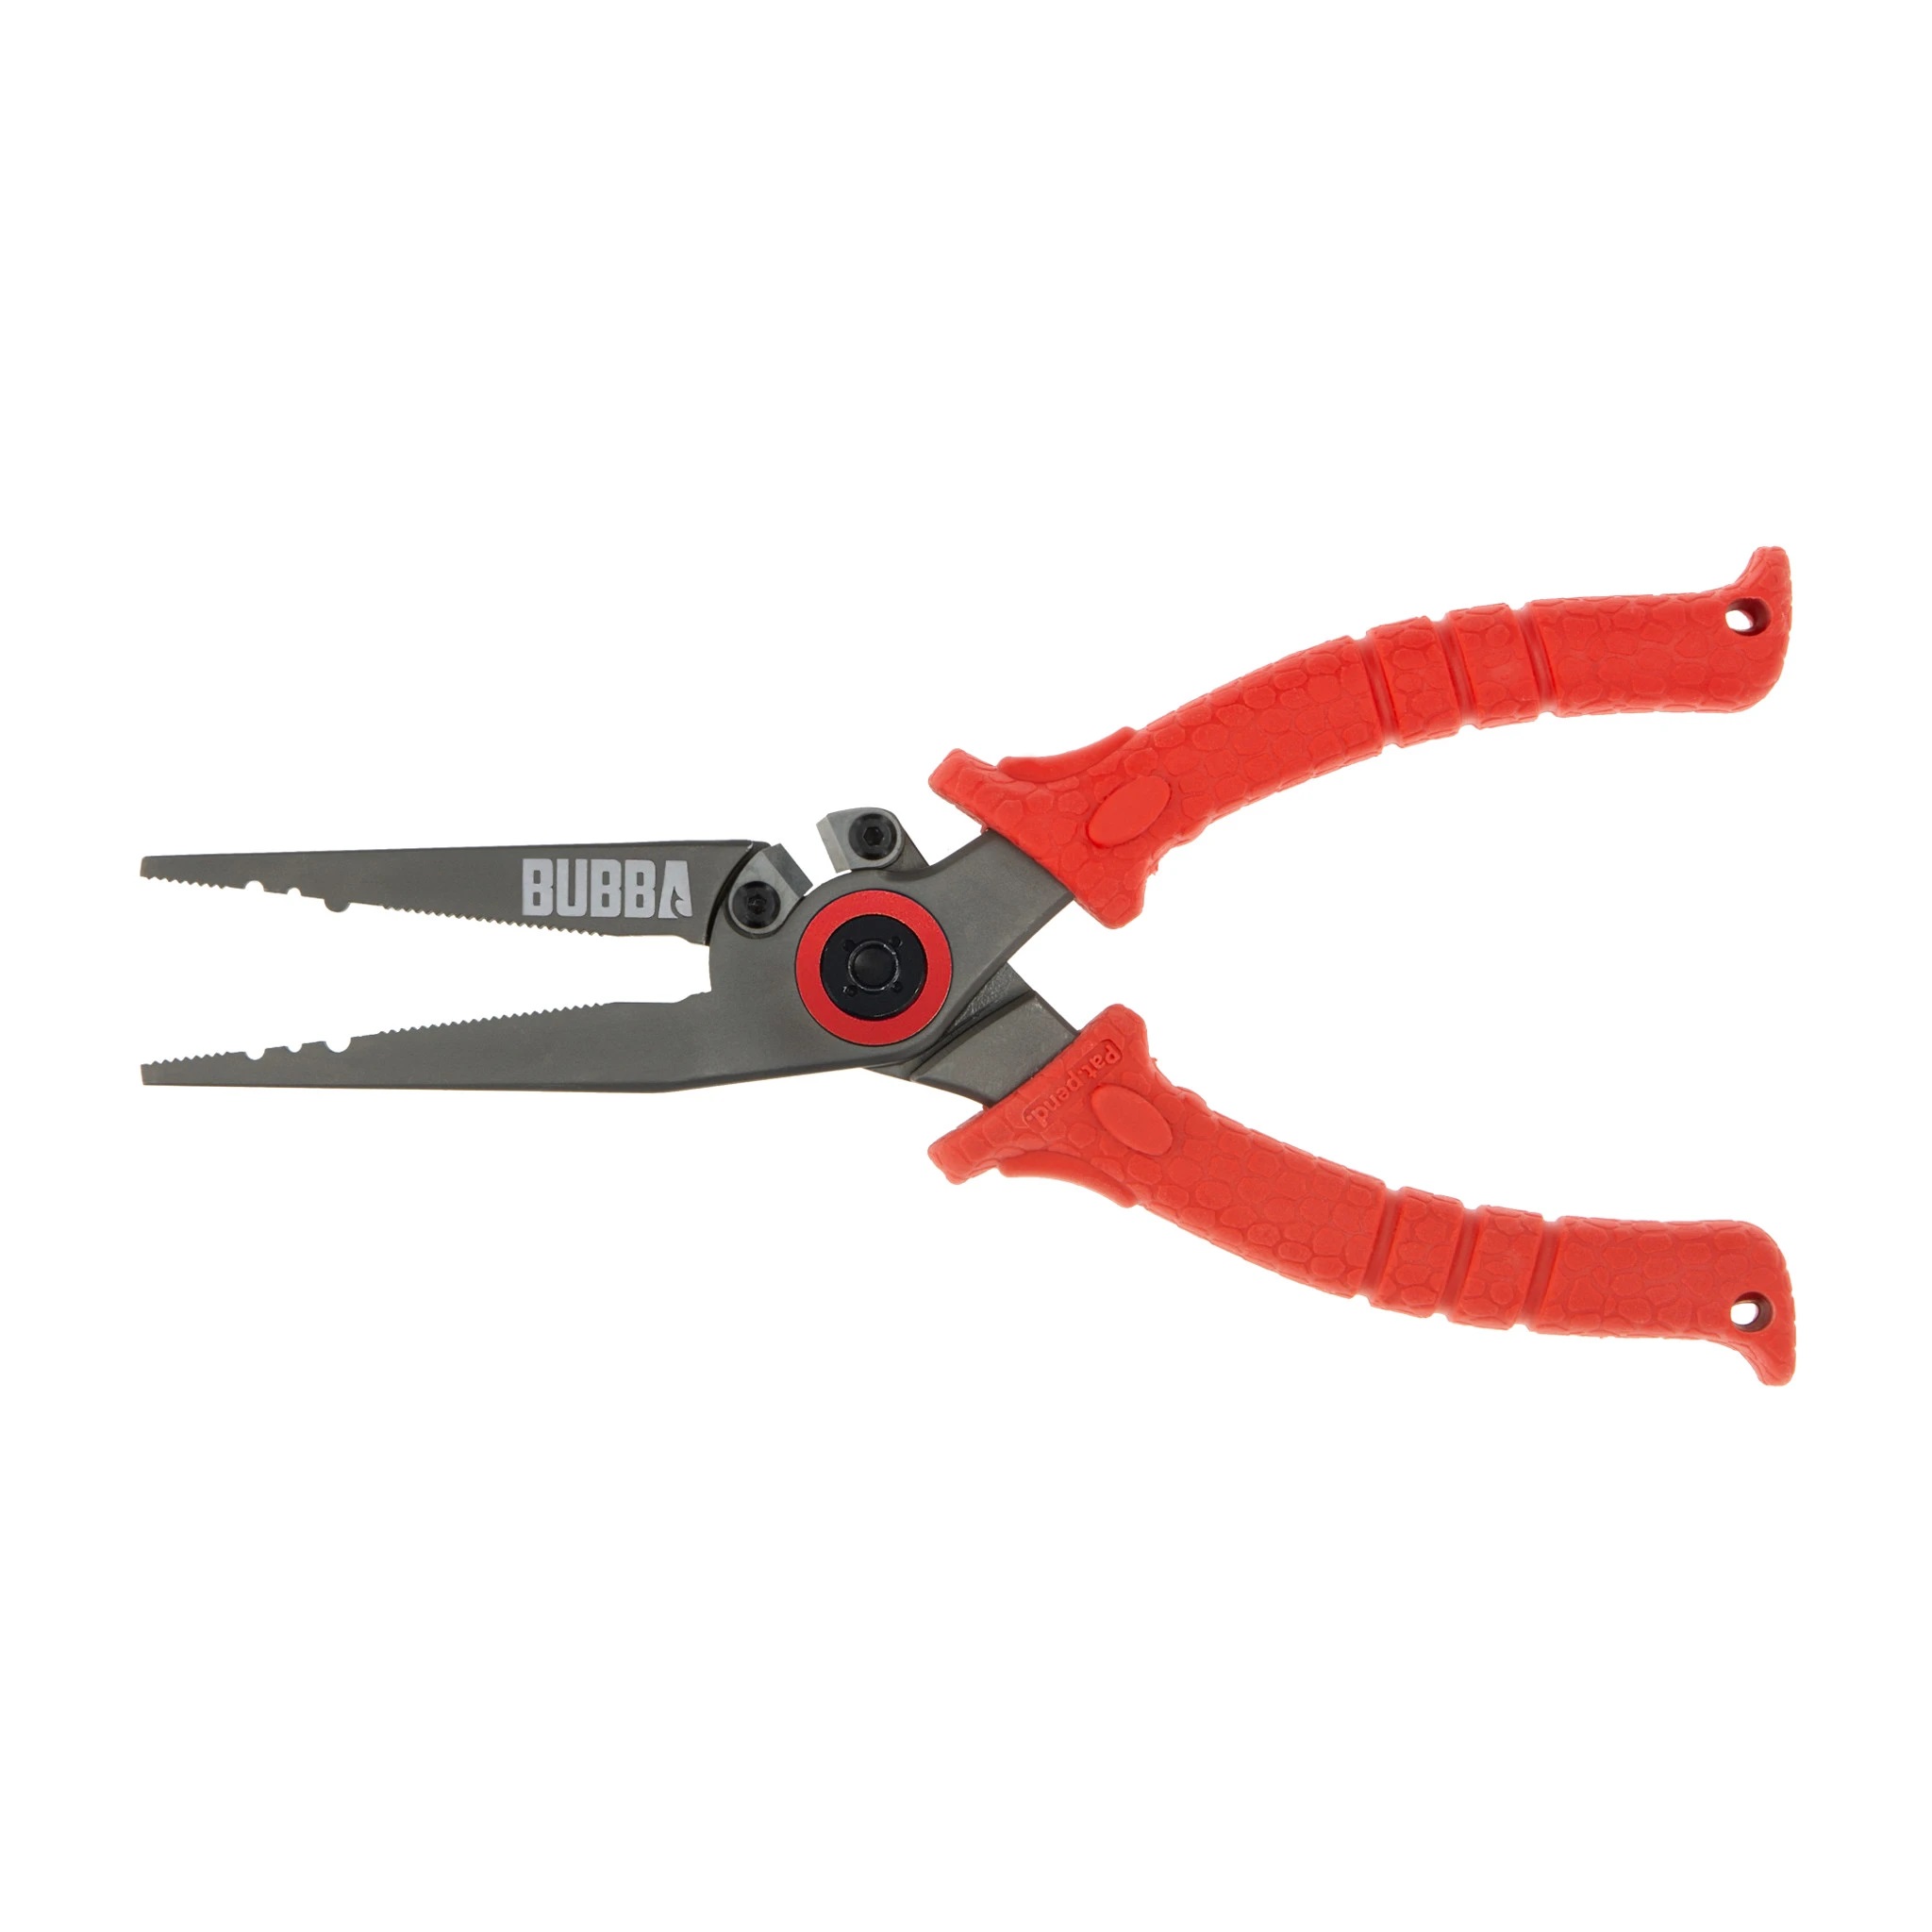 Bubba Blade Stainless Steel Fishing Pliers , Up to 14% Off with